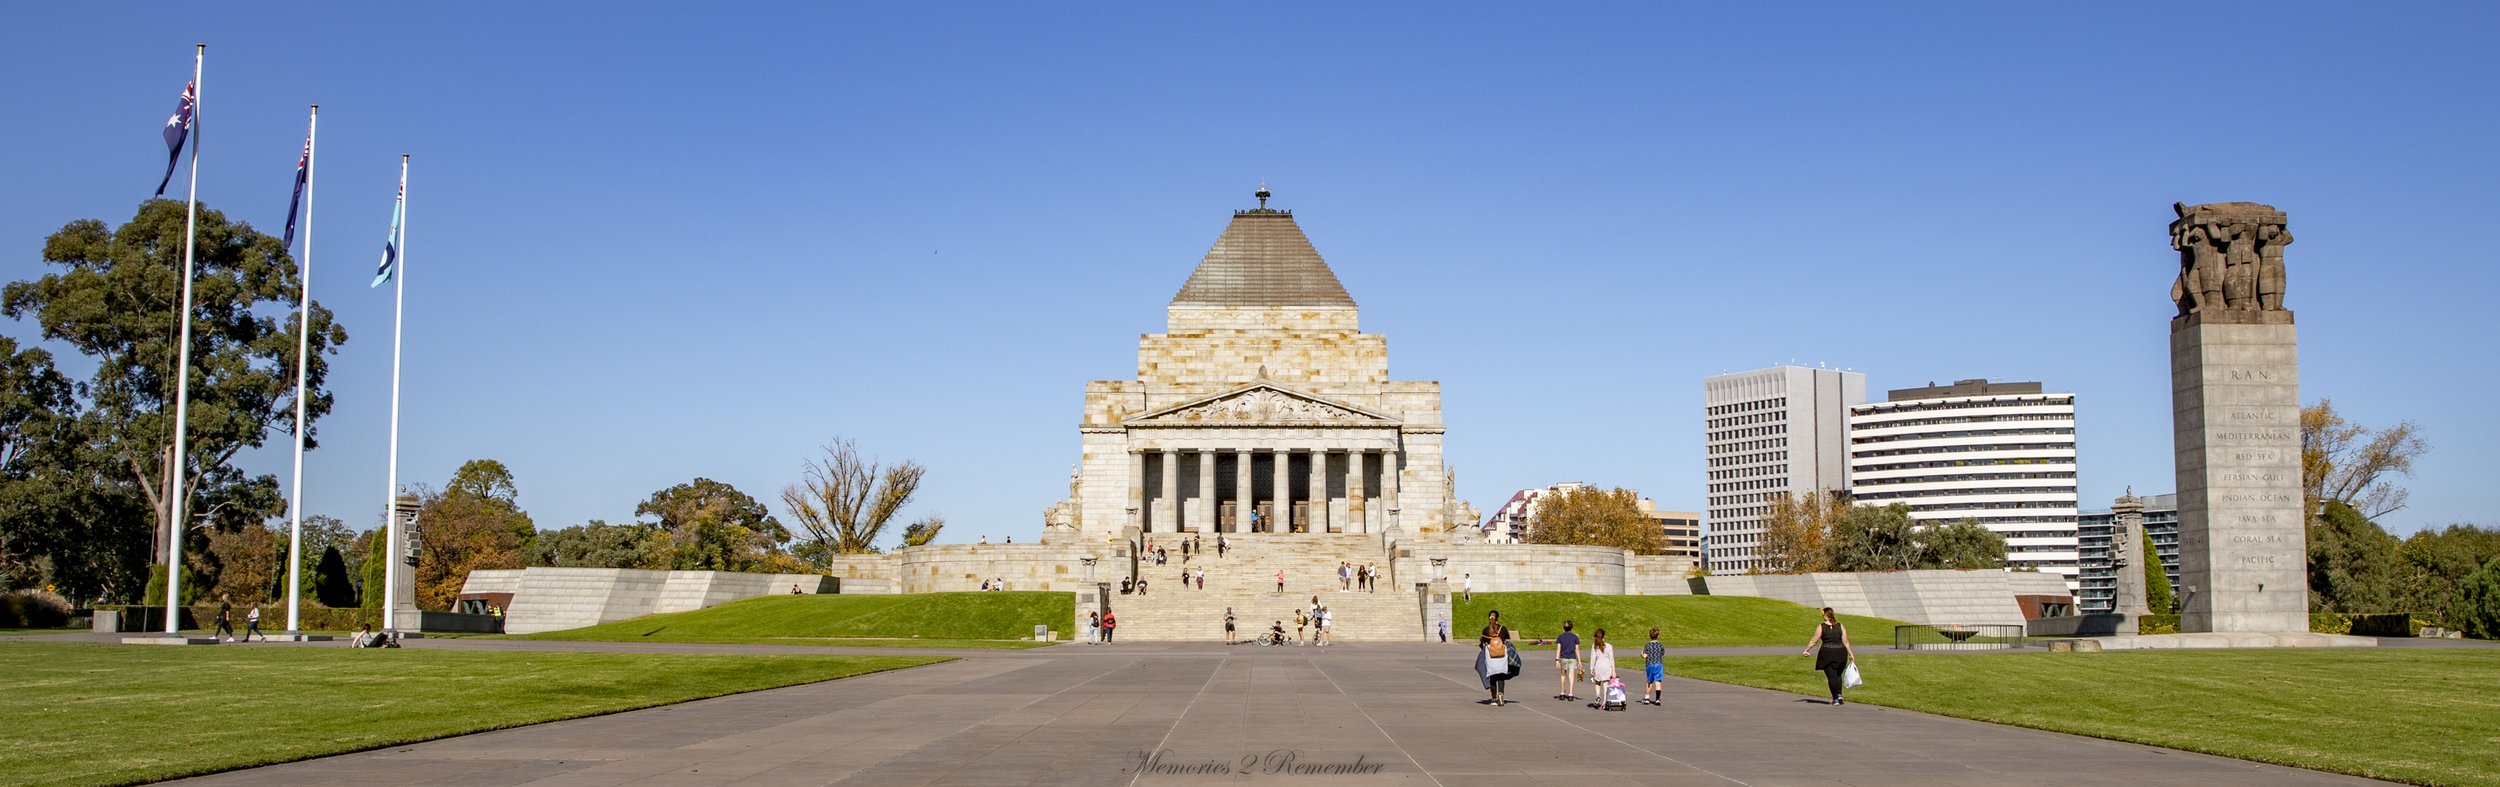 The Shrine of Remembrance Jan 2020